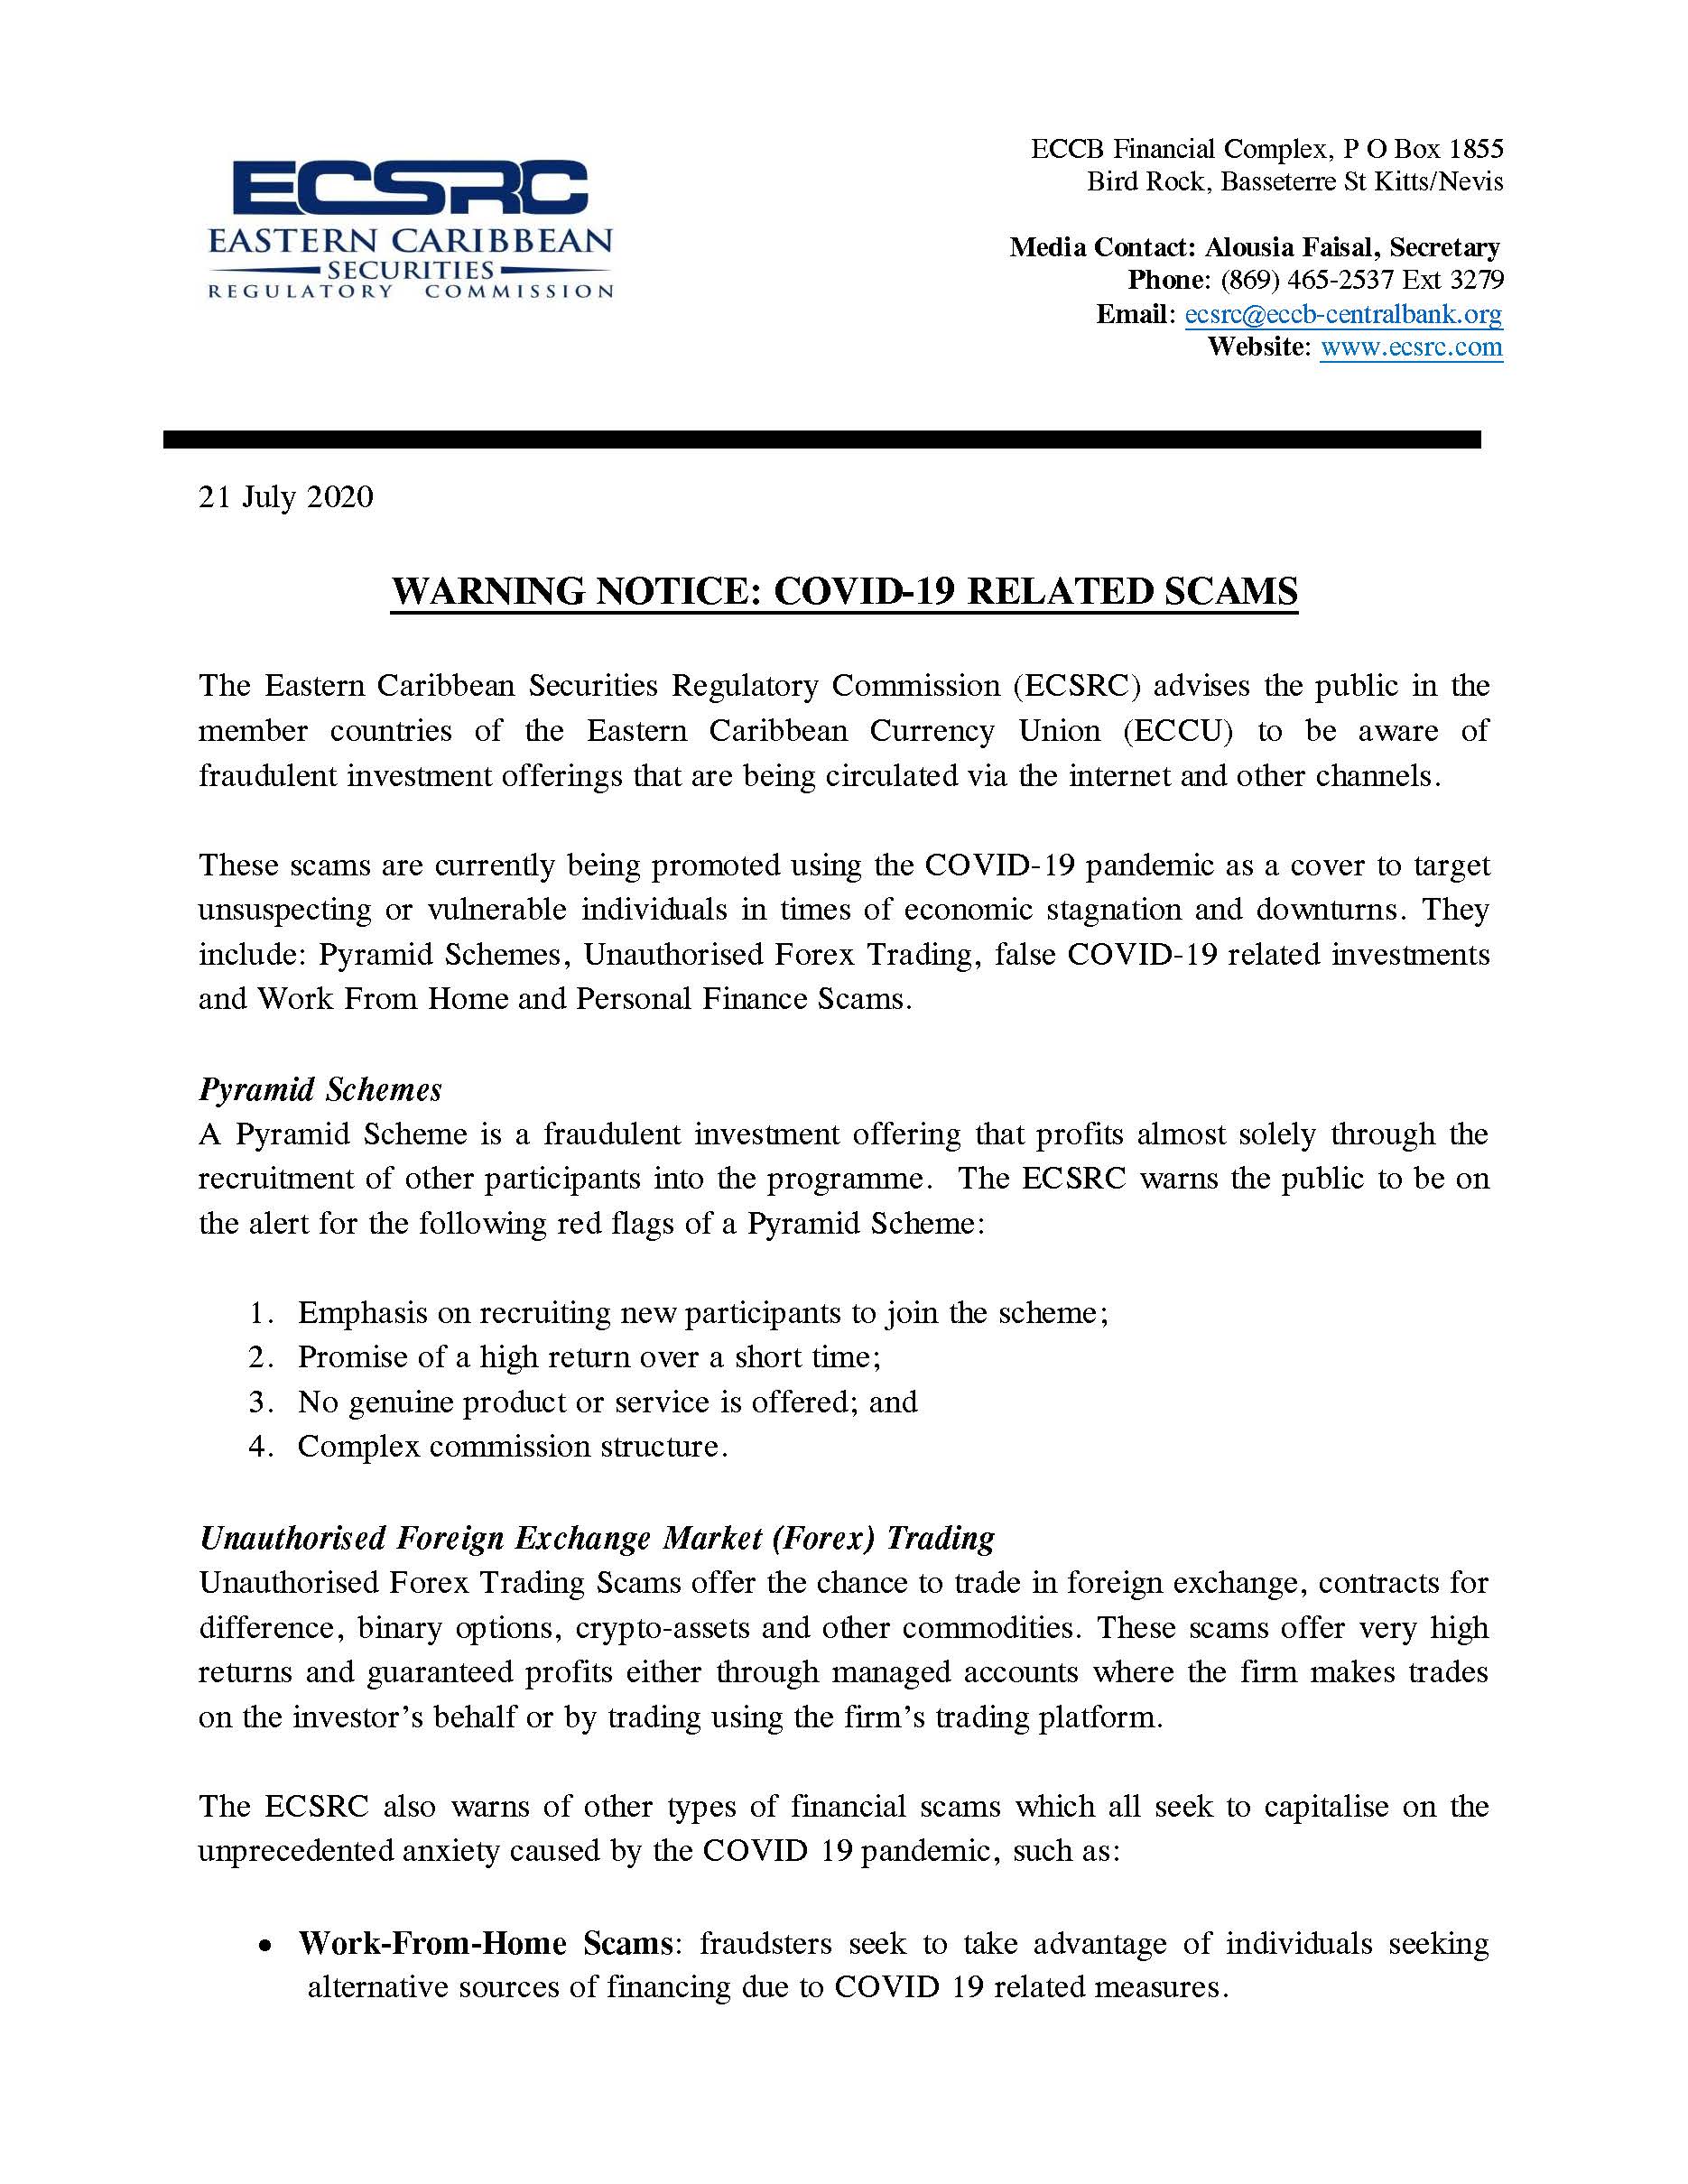 ECSRC – WARNING NOTICE: COVID-19 RELATED SCAMS